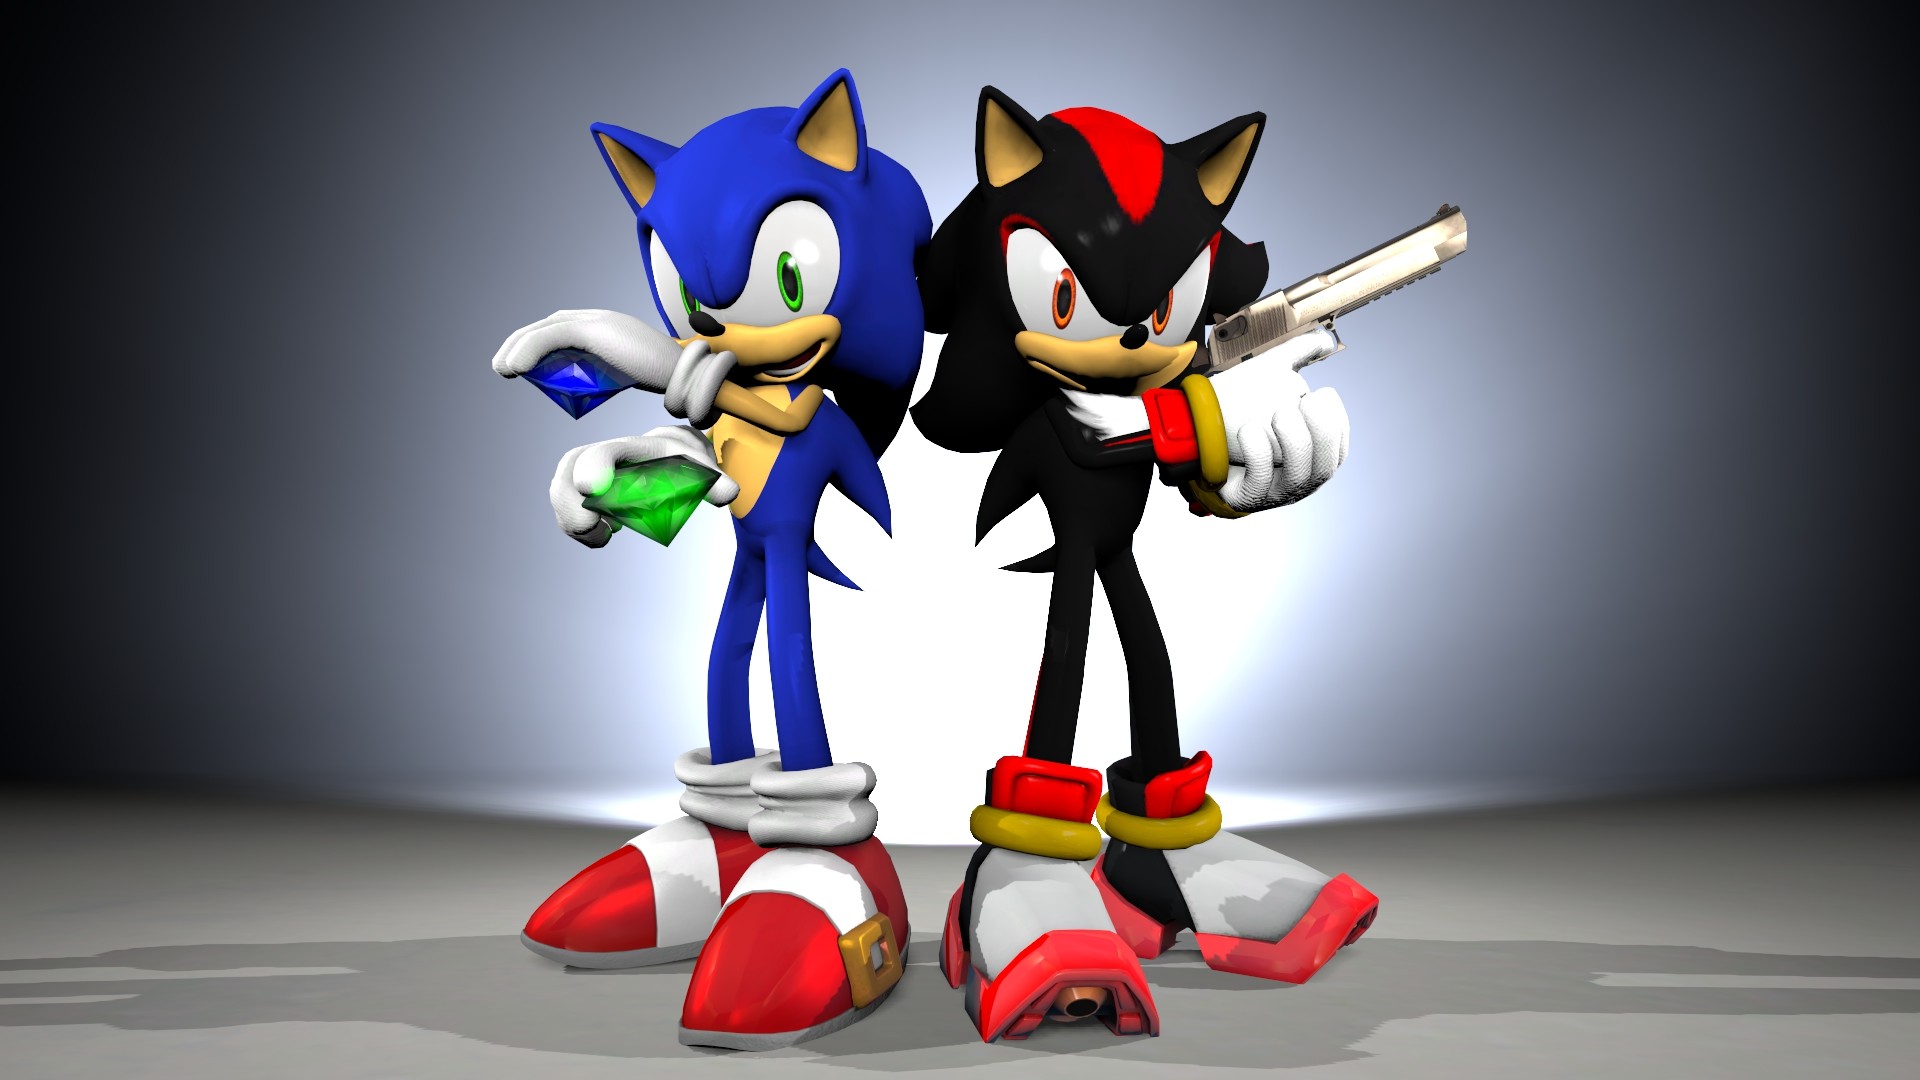 [49+] sonic shadow and silver wallpapers on wallpapersafari on sonic shadow and silver wallpapers